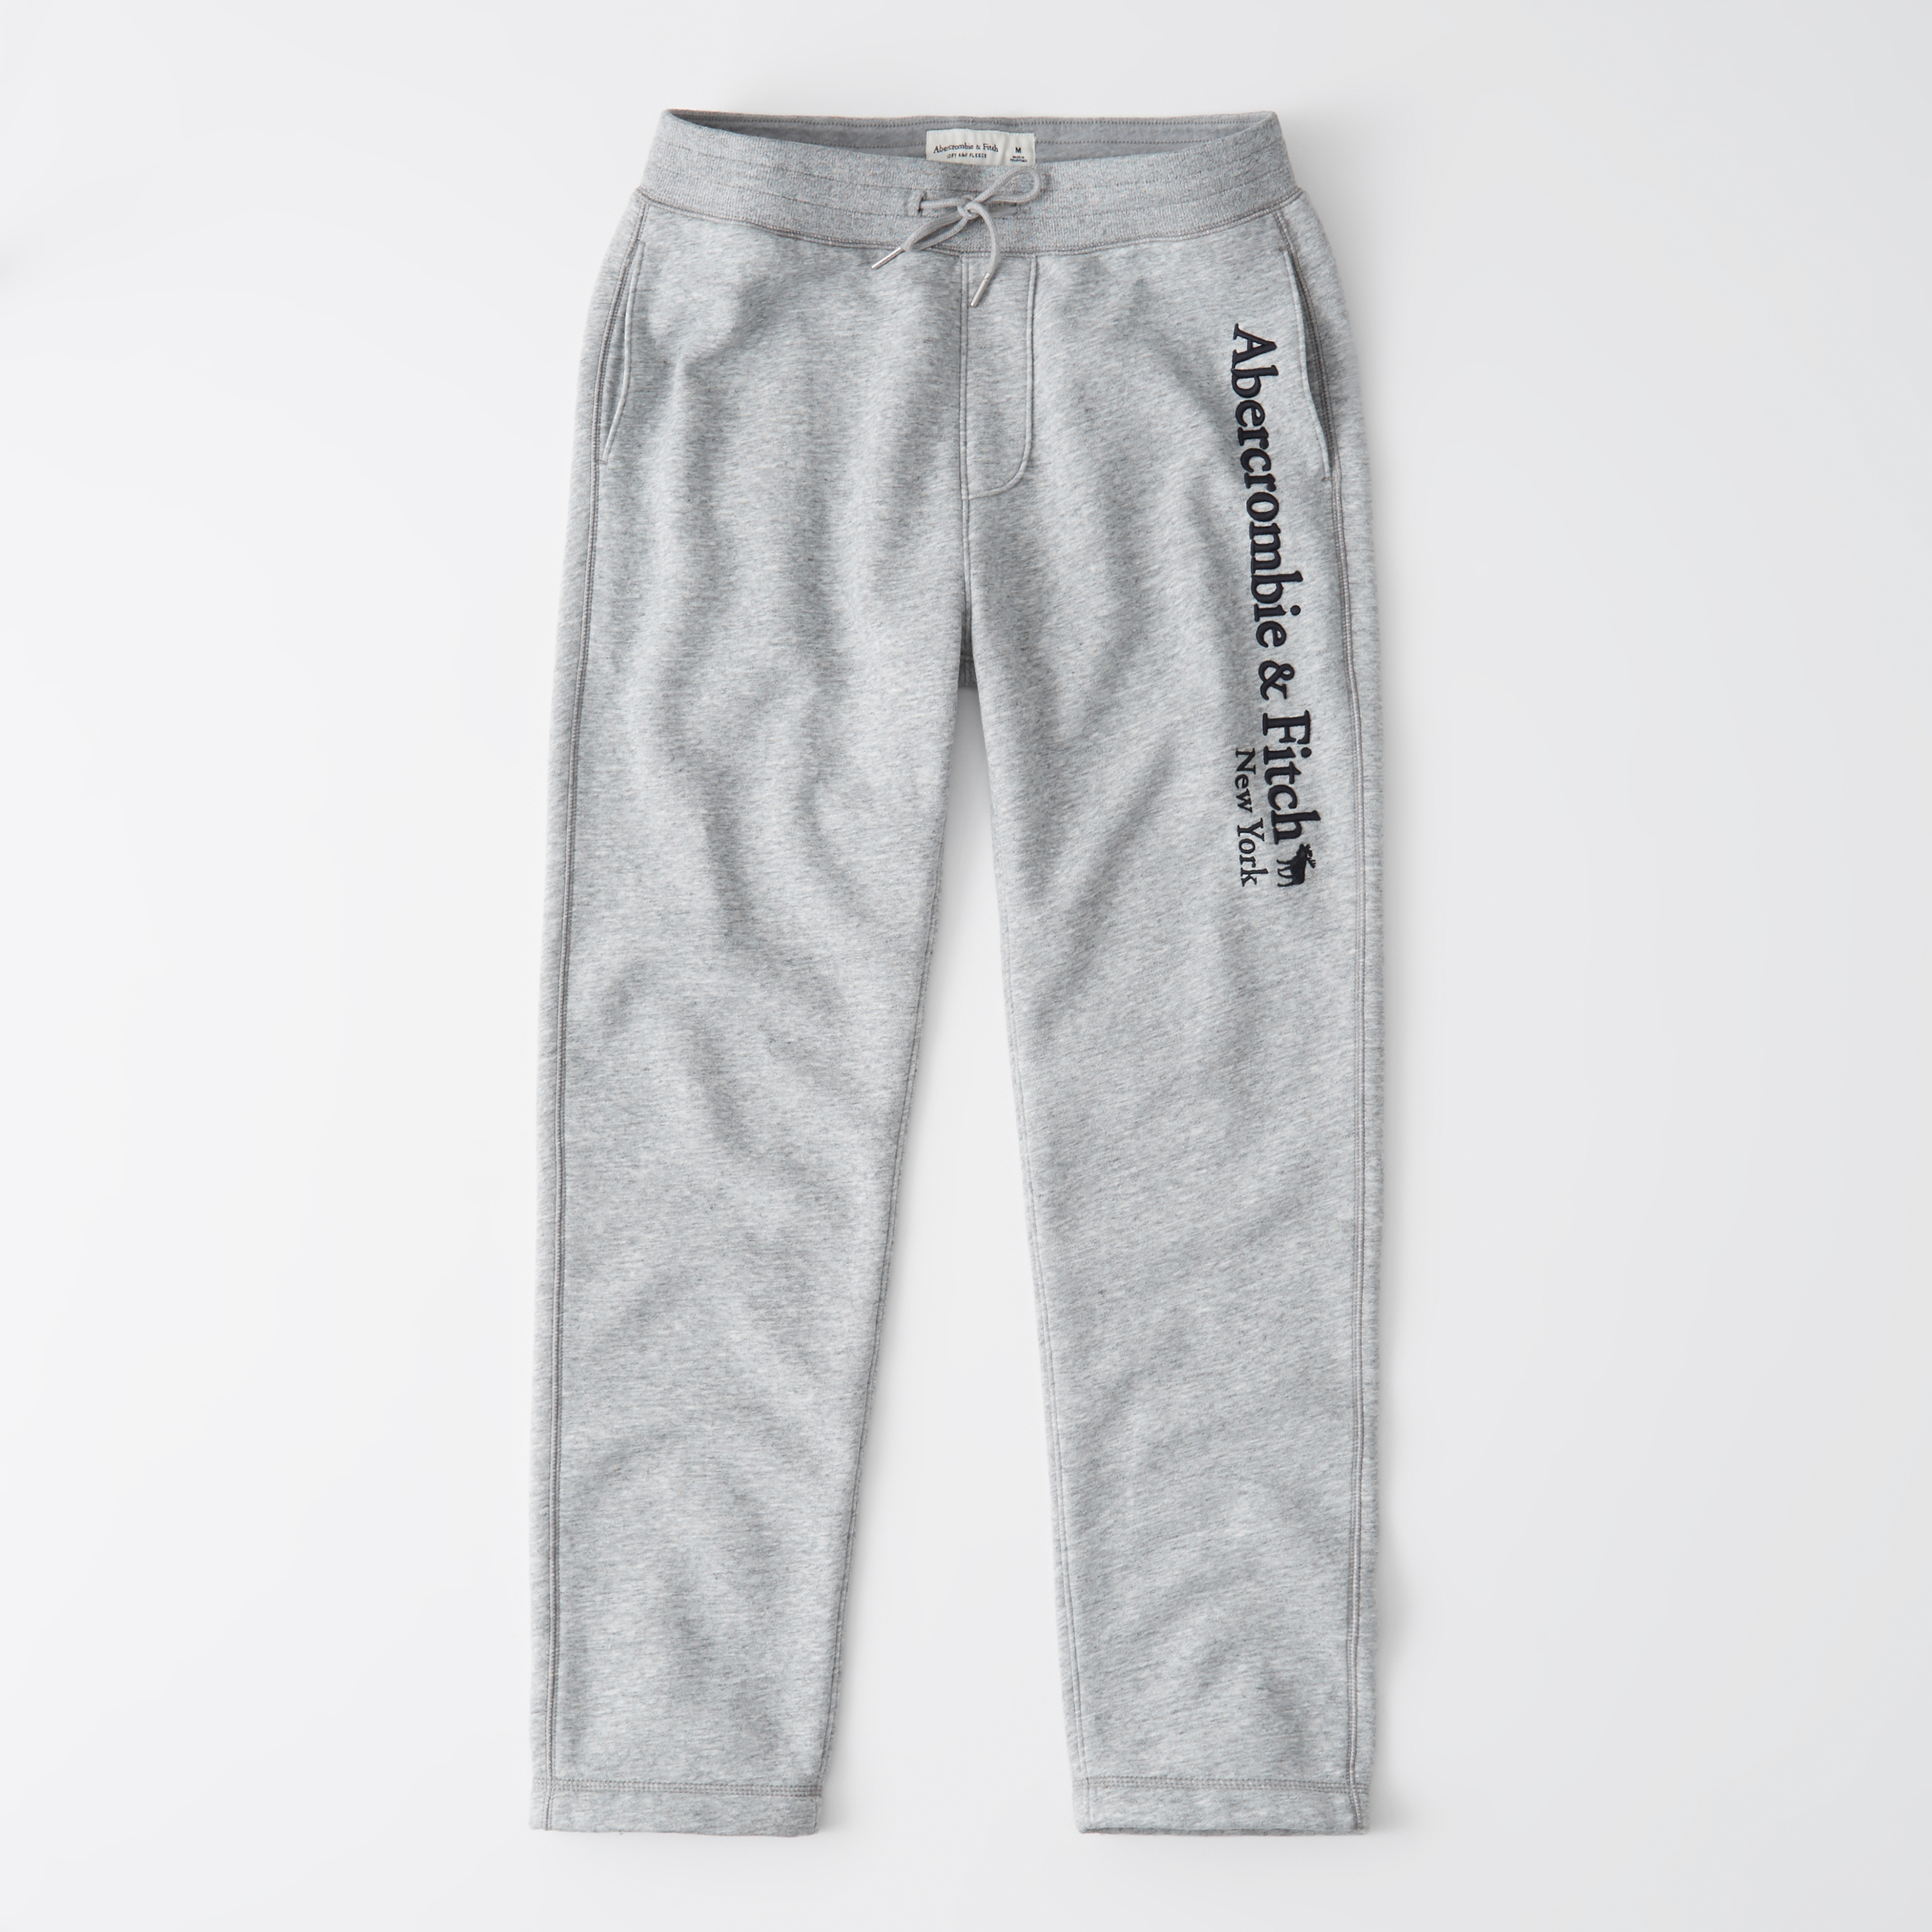 abercrombie and fitch sweatpants mens